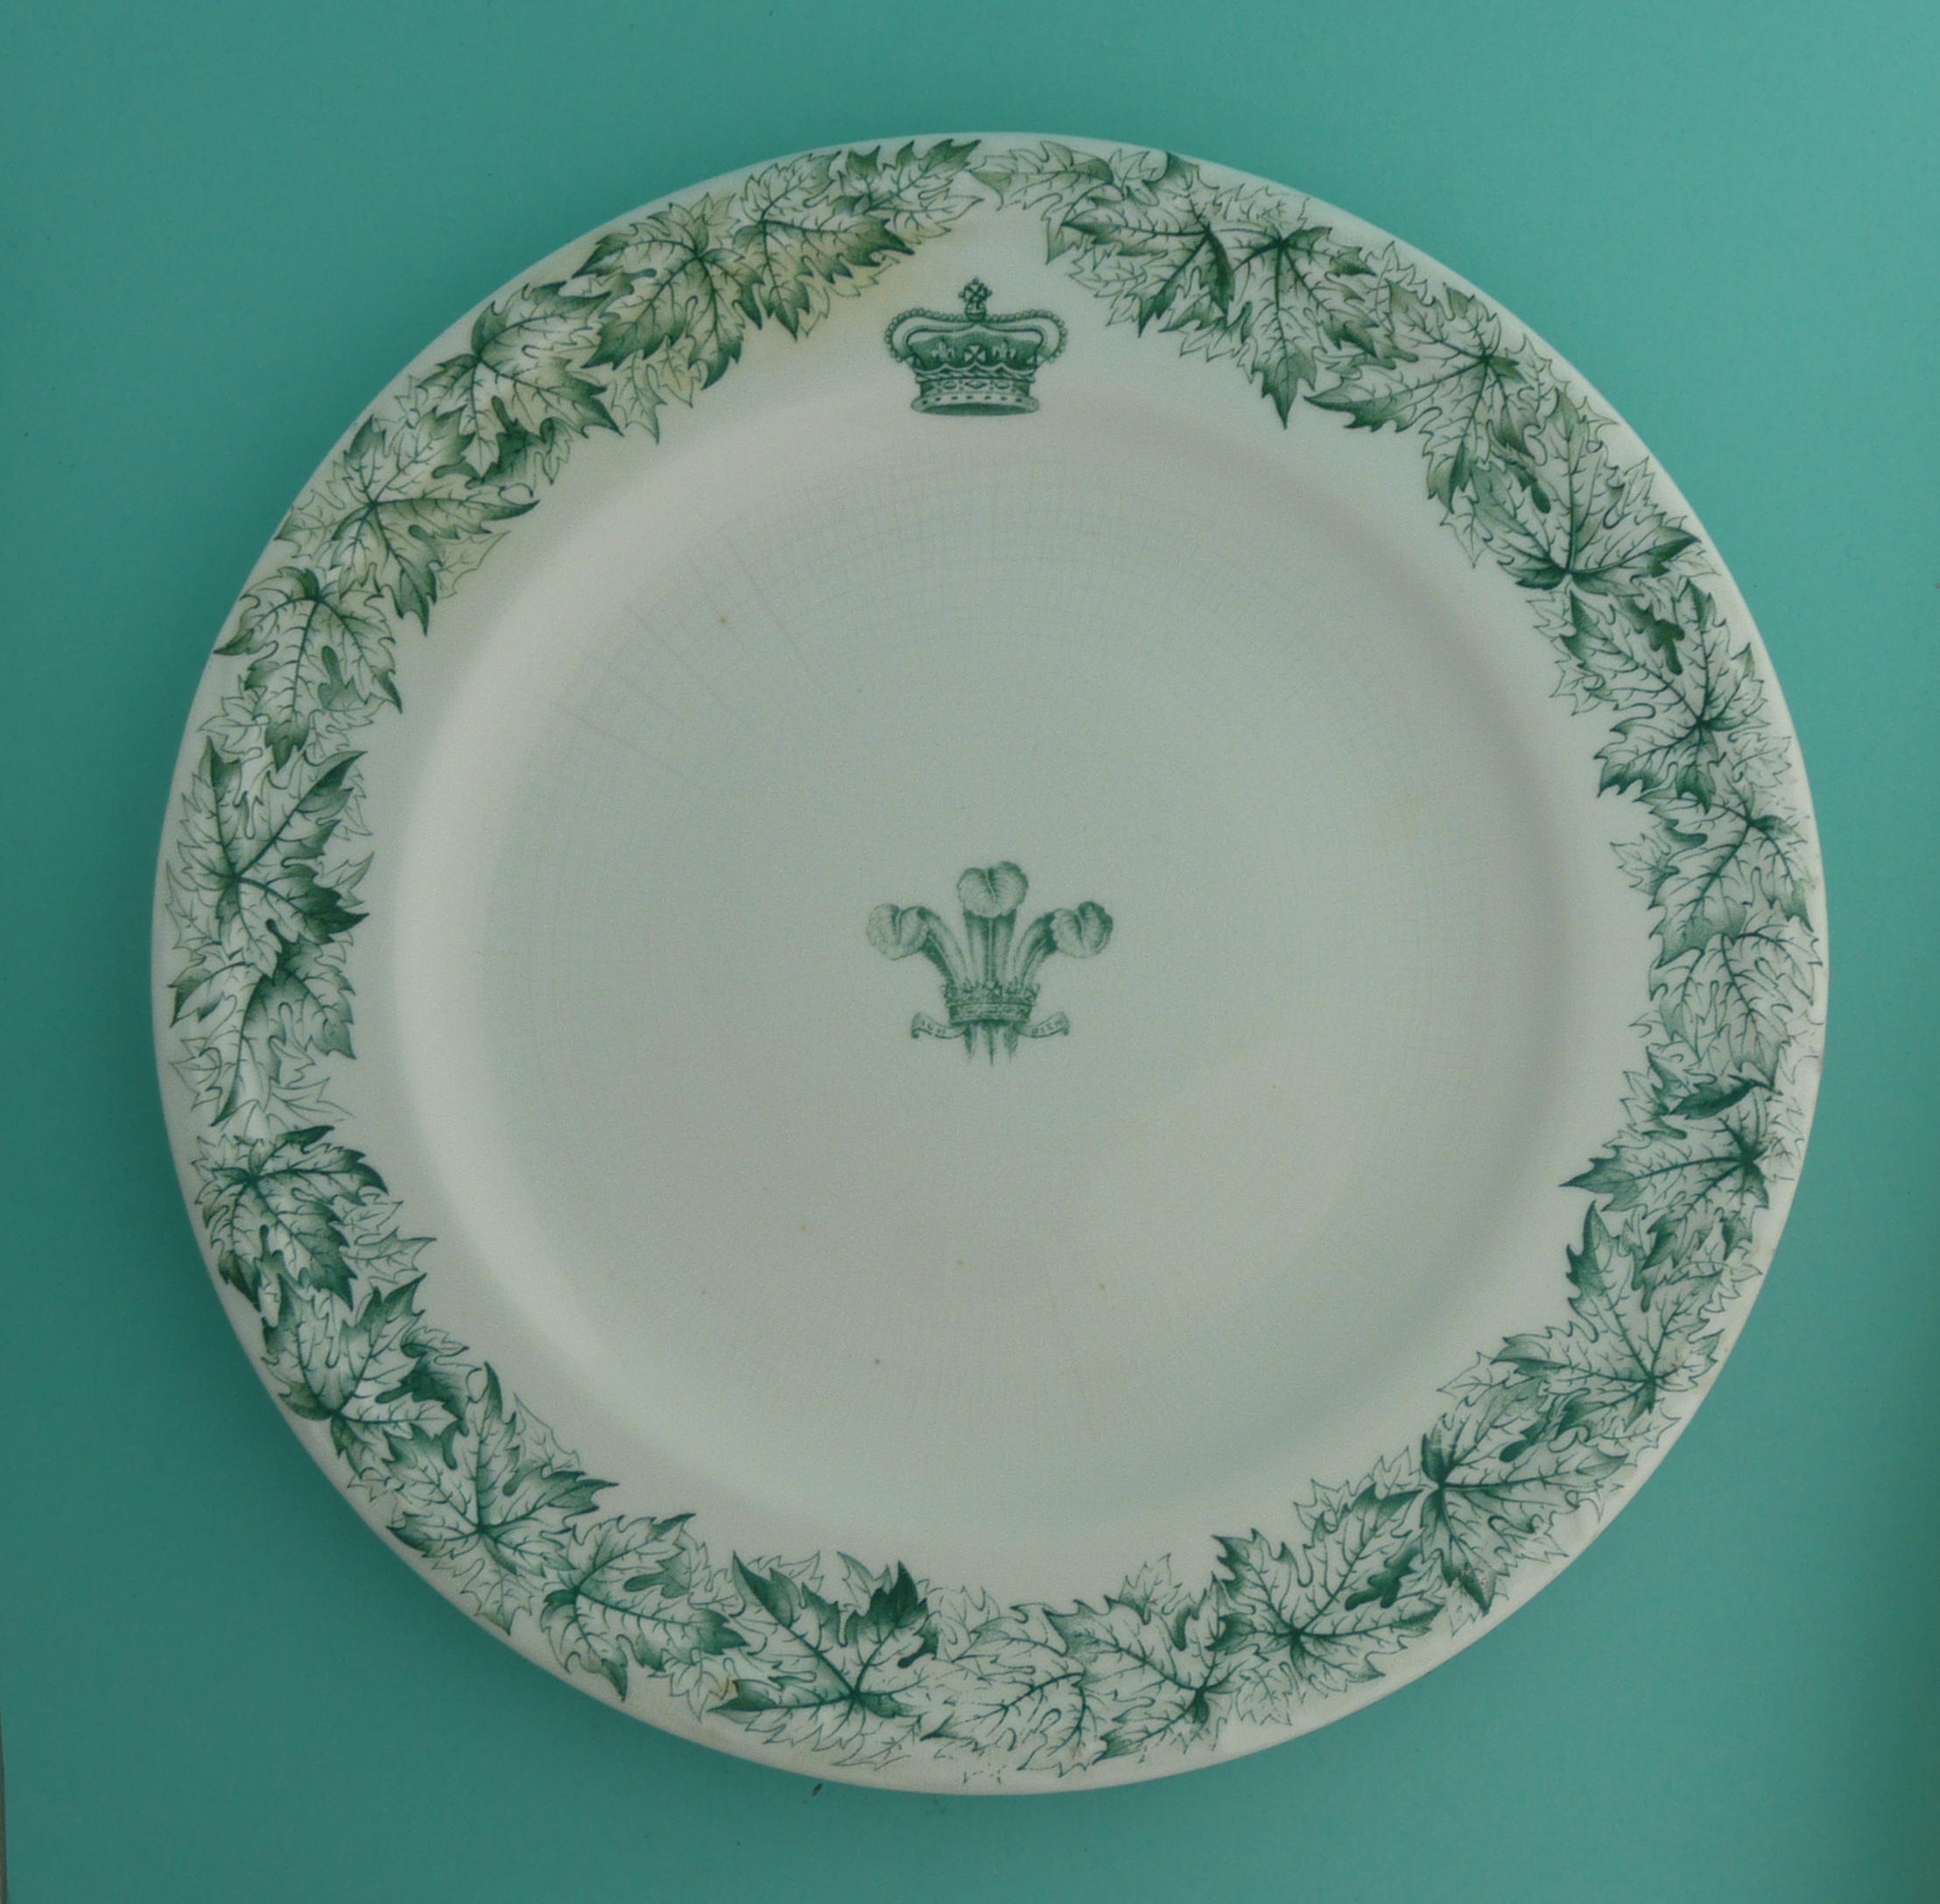 1860 Visit to Canada by Prince of Wales: a good pottery plate printed in green with Prince of